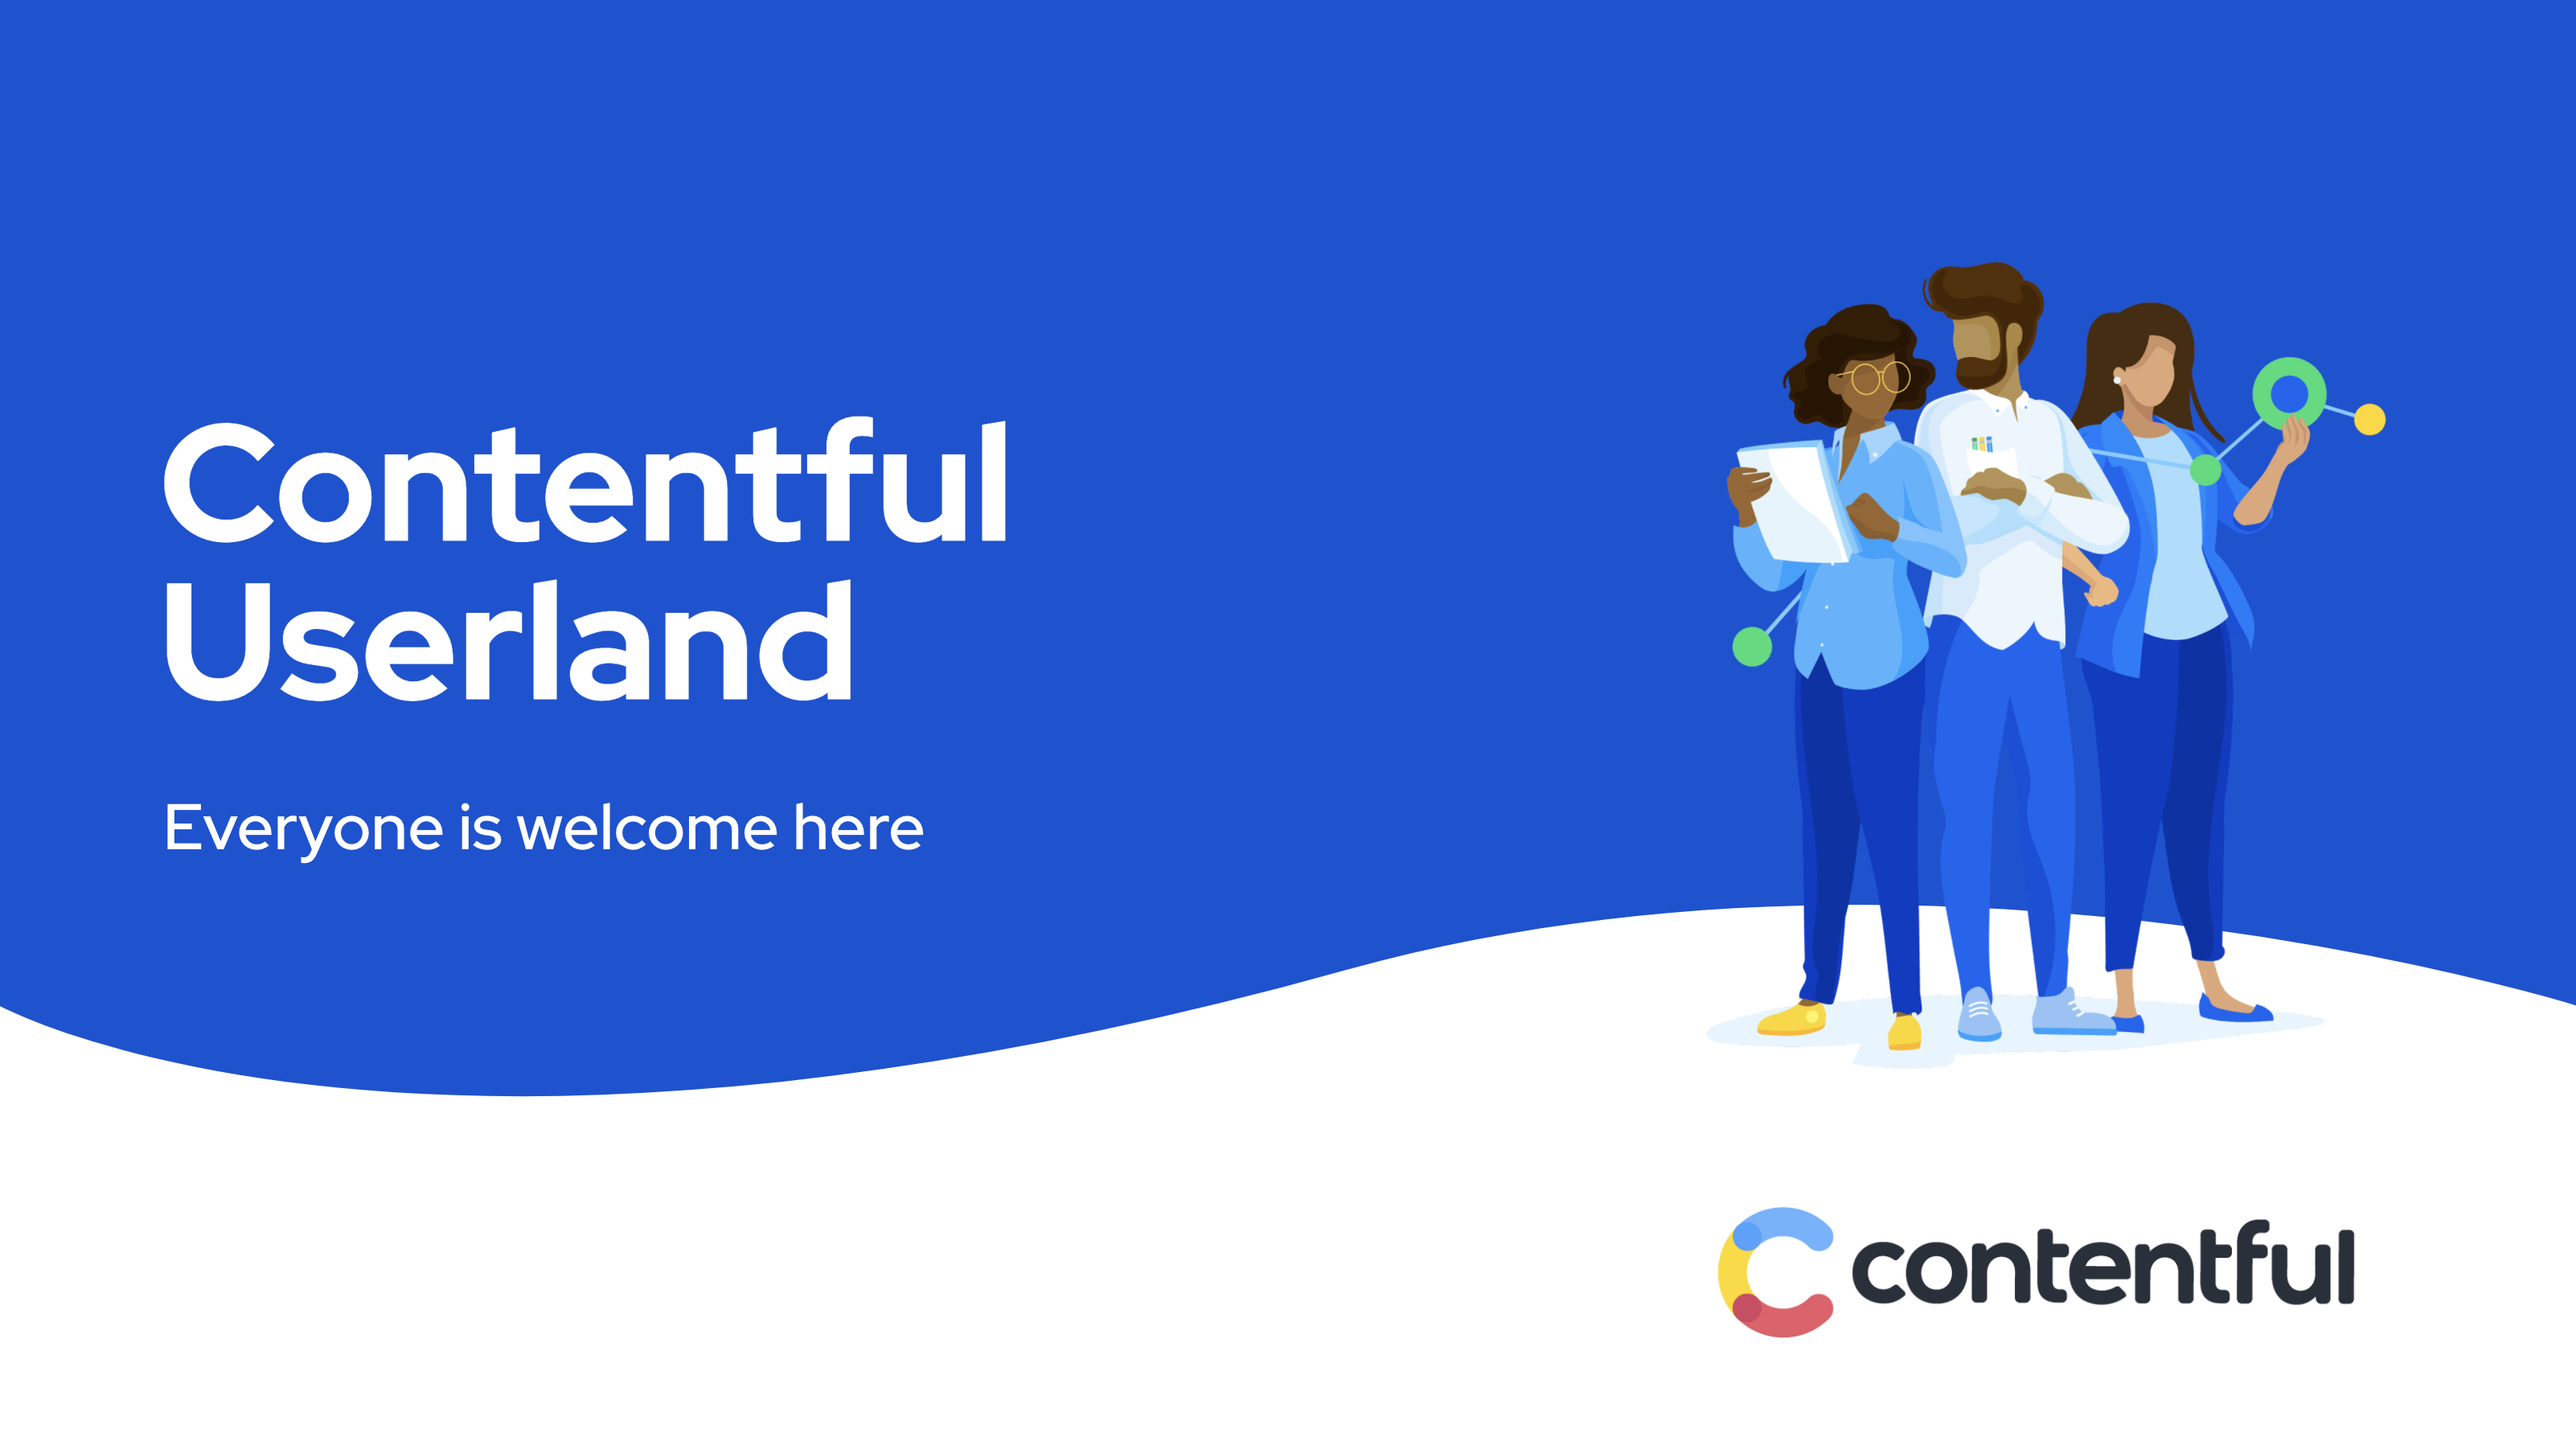 Contentful Userland – Everyone is welcome here